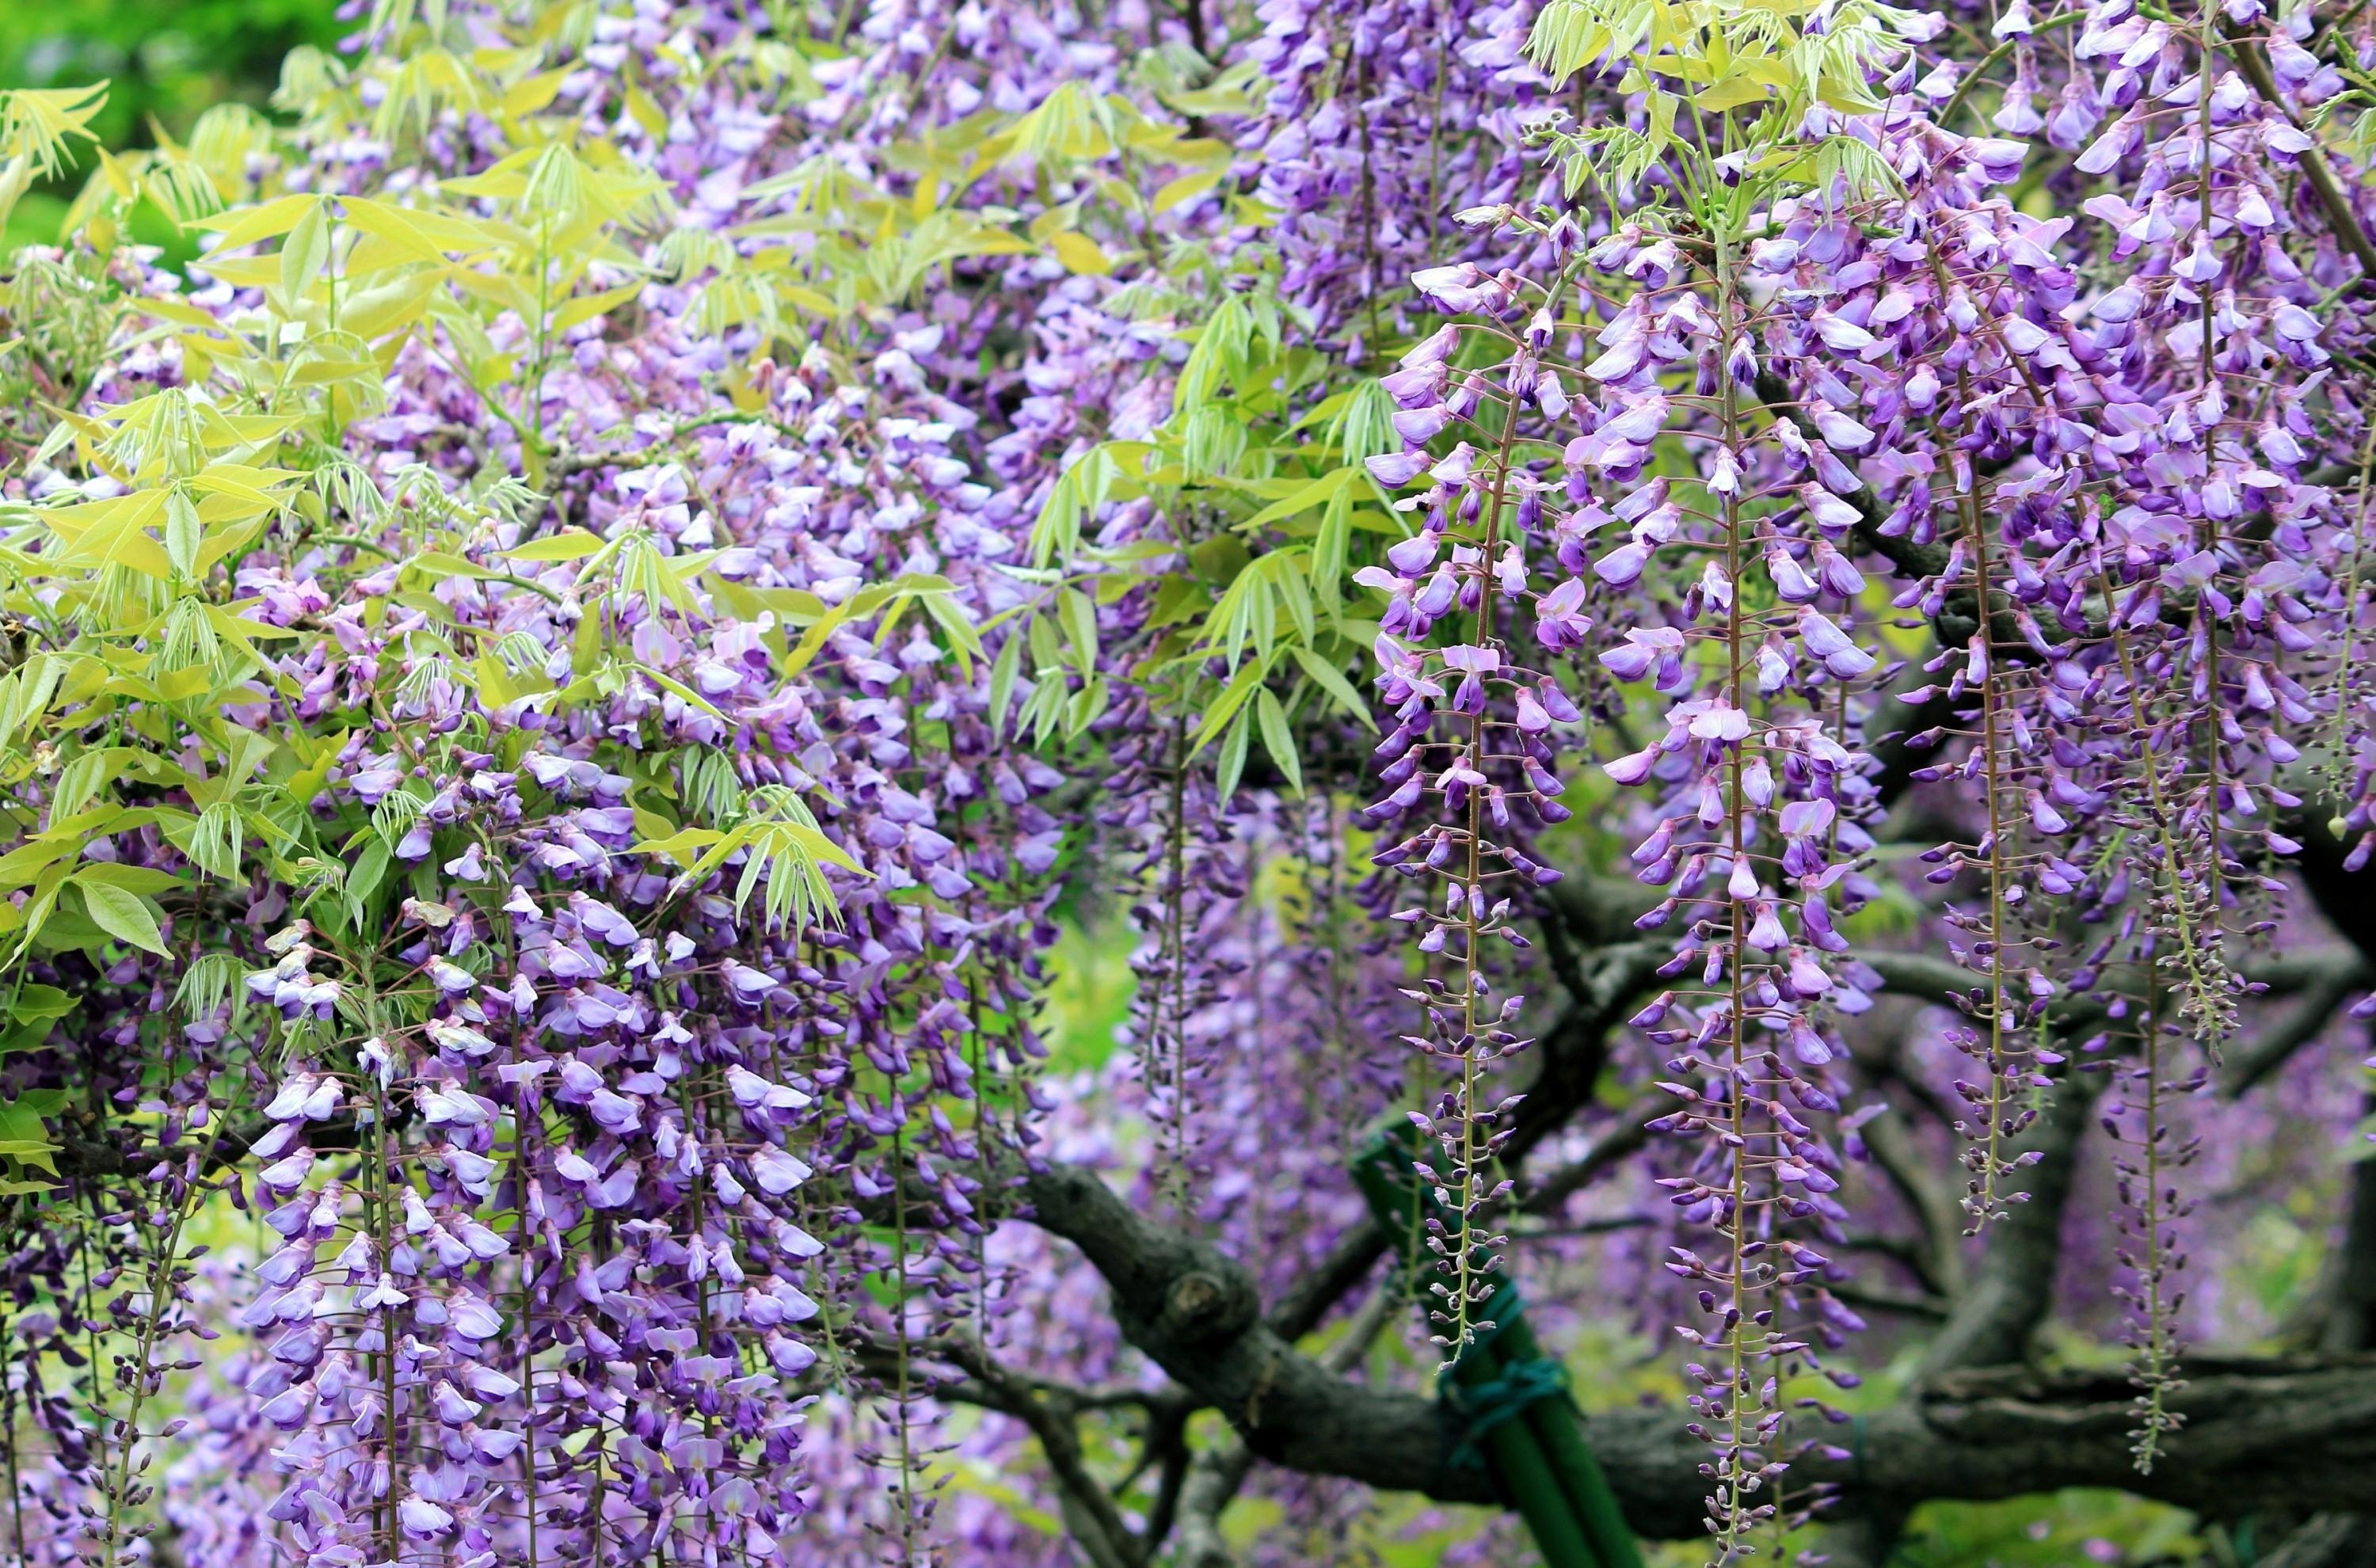 flowers, branches, bunches, clusters, sharpness, wisteria High Definition image